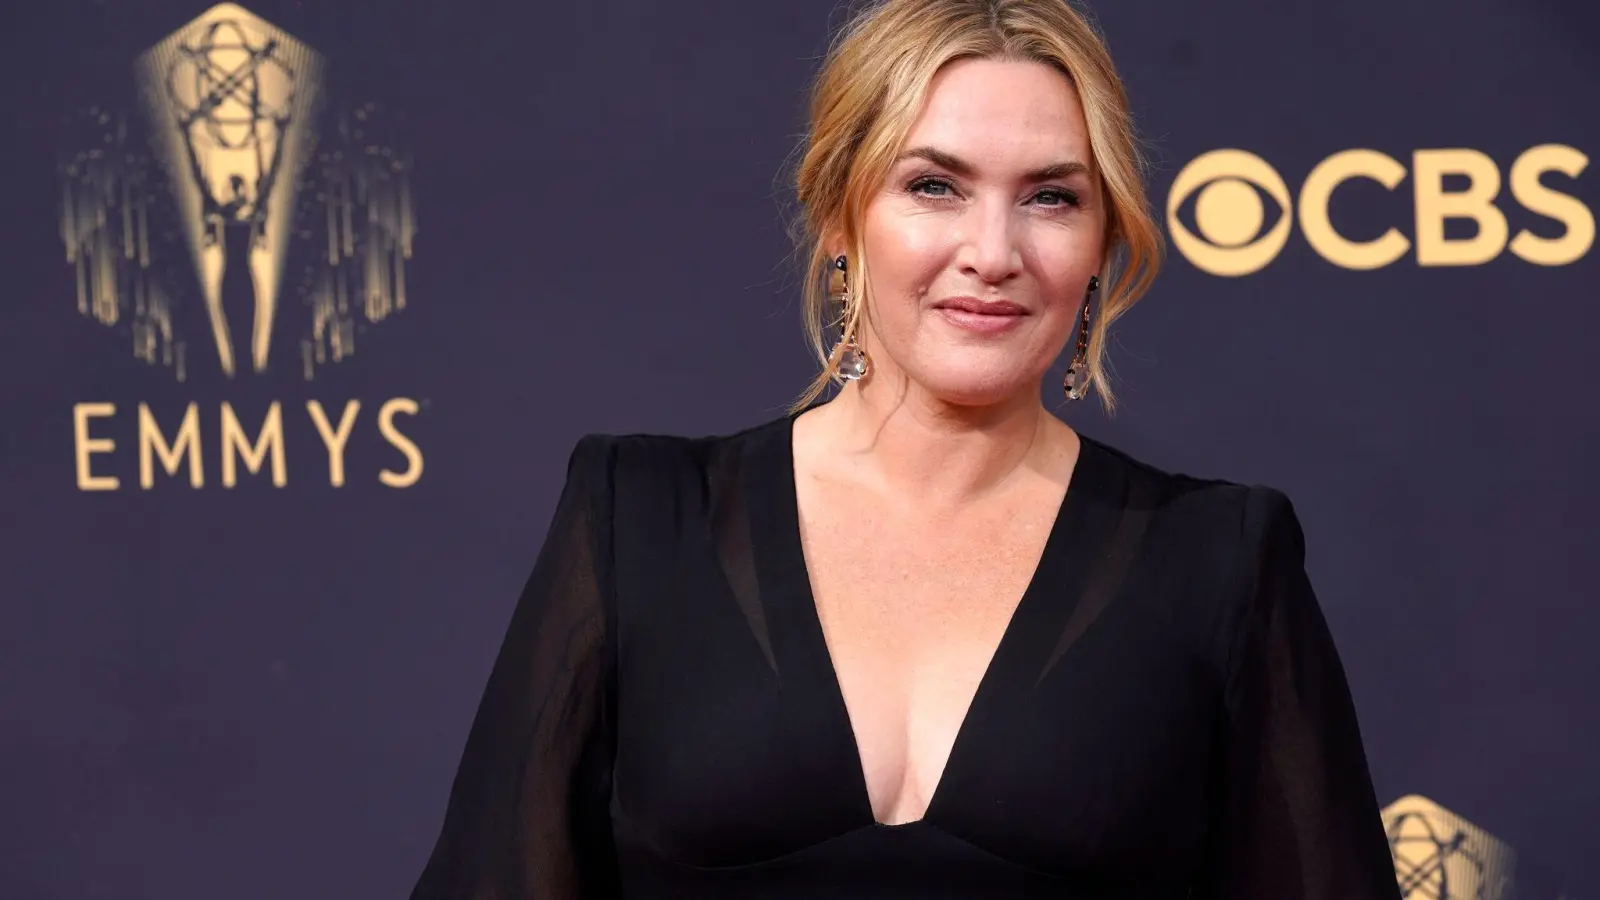 Kate Winslet bei den Primetime Emmy Awards in Los Angeles. (Foto: Chris Pizzello/Invision/dpa)